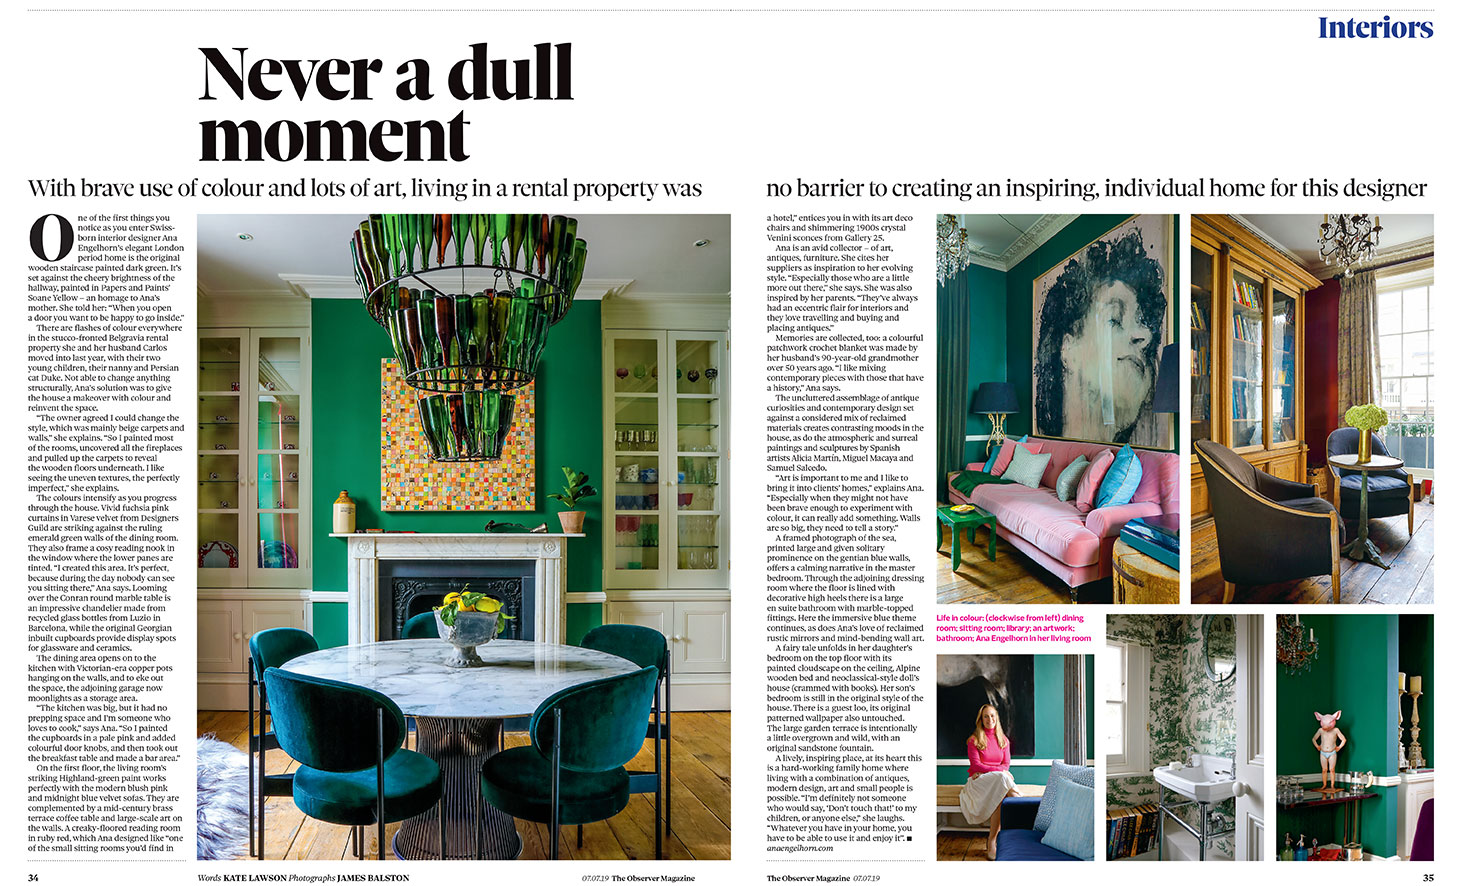 Magazine article about a London home with colourful interiors